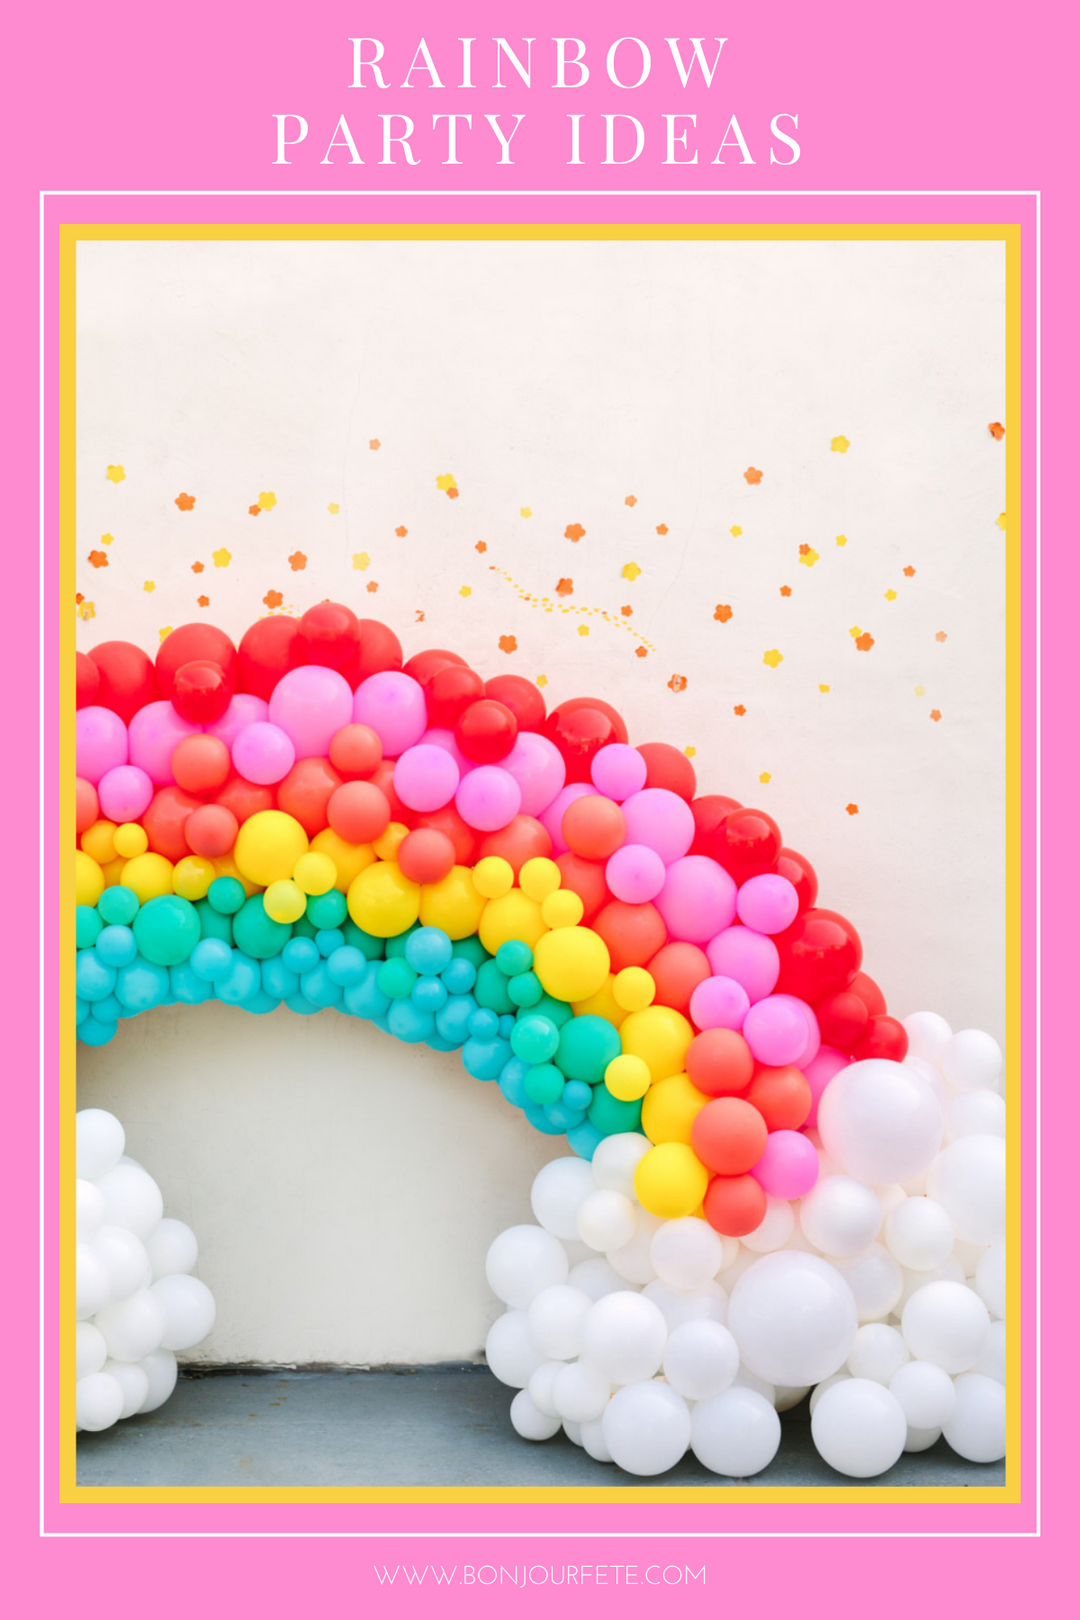 RAINBOW BIRTHDAY PARTY IDEAS FOR GIRLS OF ALL AGES